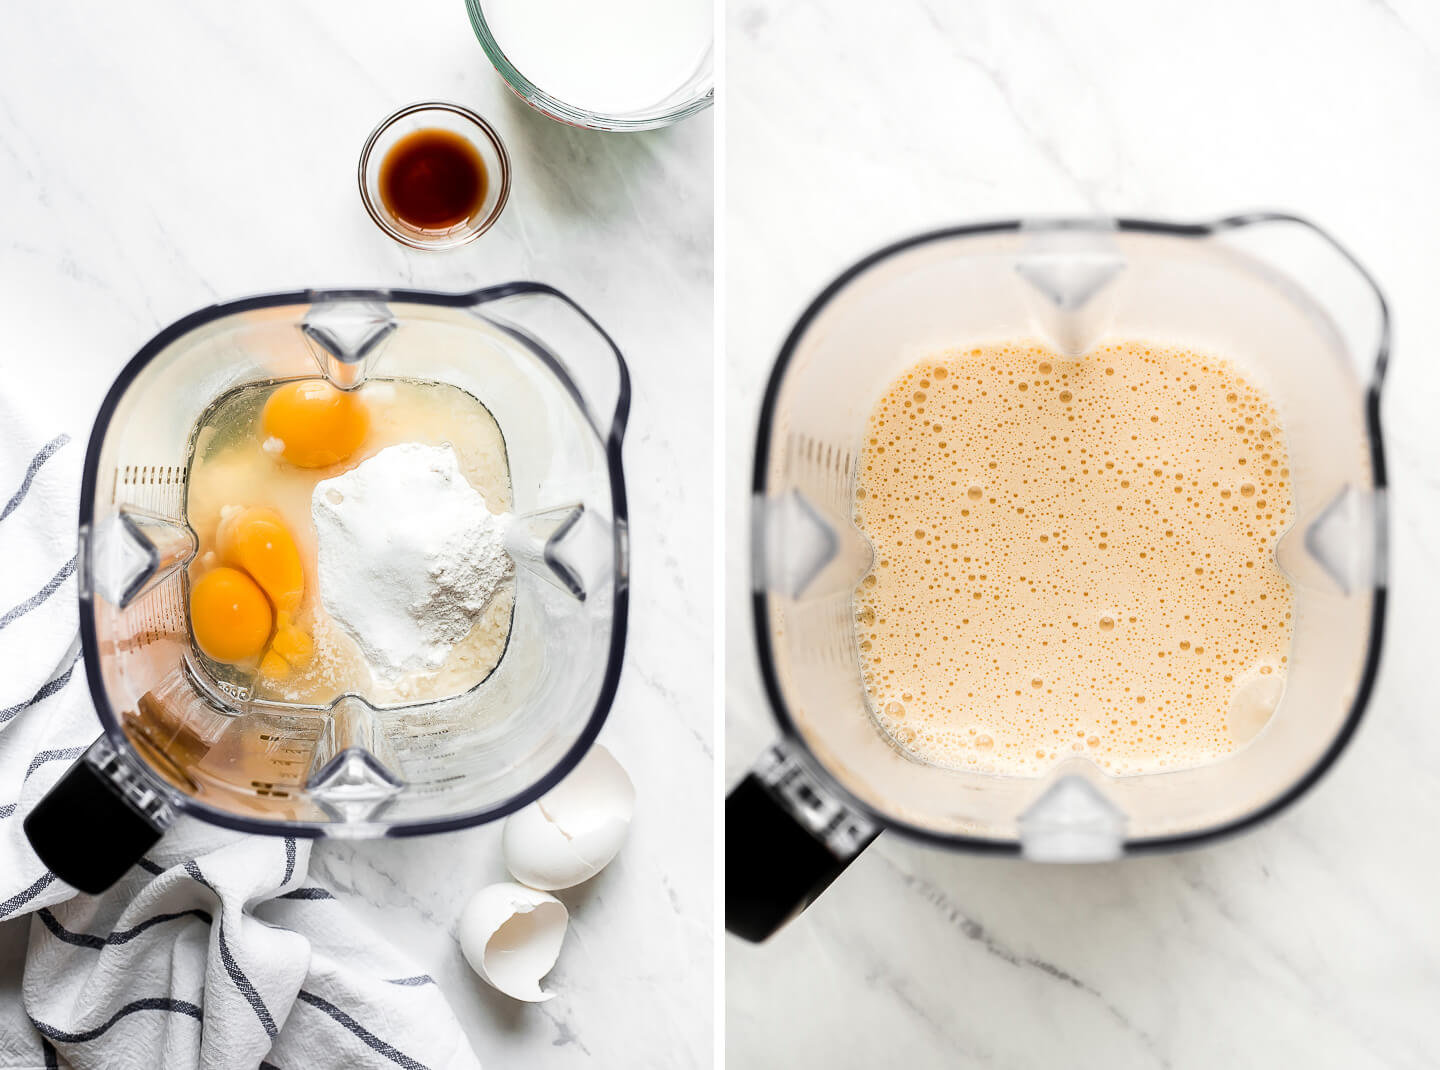 Diptych- Top view of a blender with flour, sugar, eggs; all ingredients blended together.